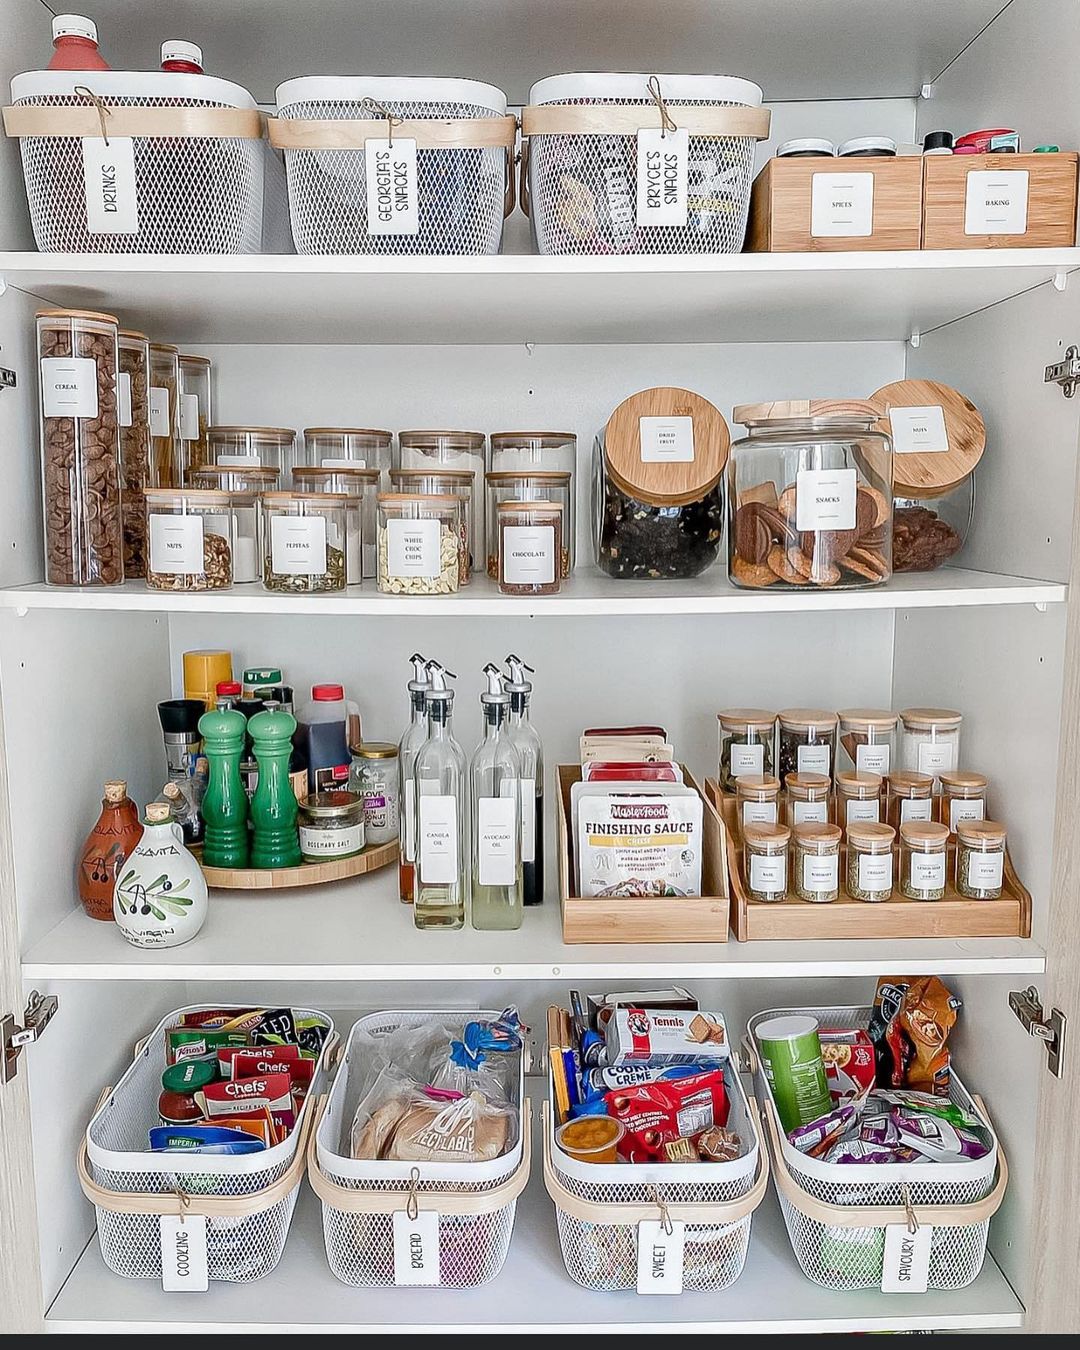 A pantry filled with food and beverages, organized and stocked.